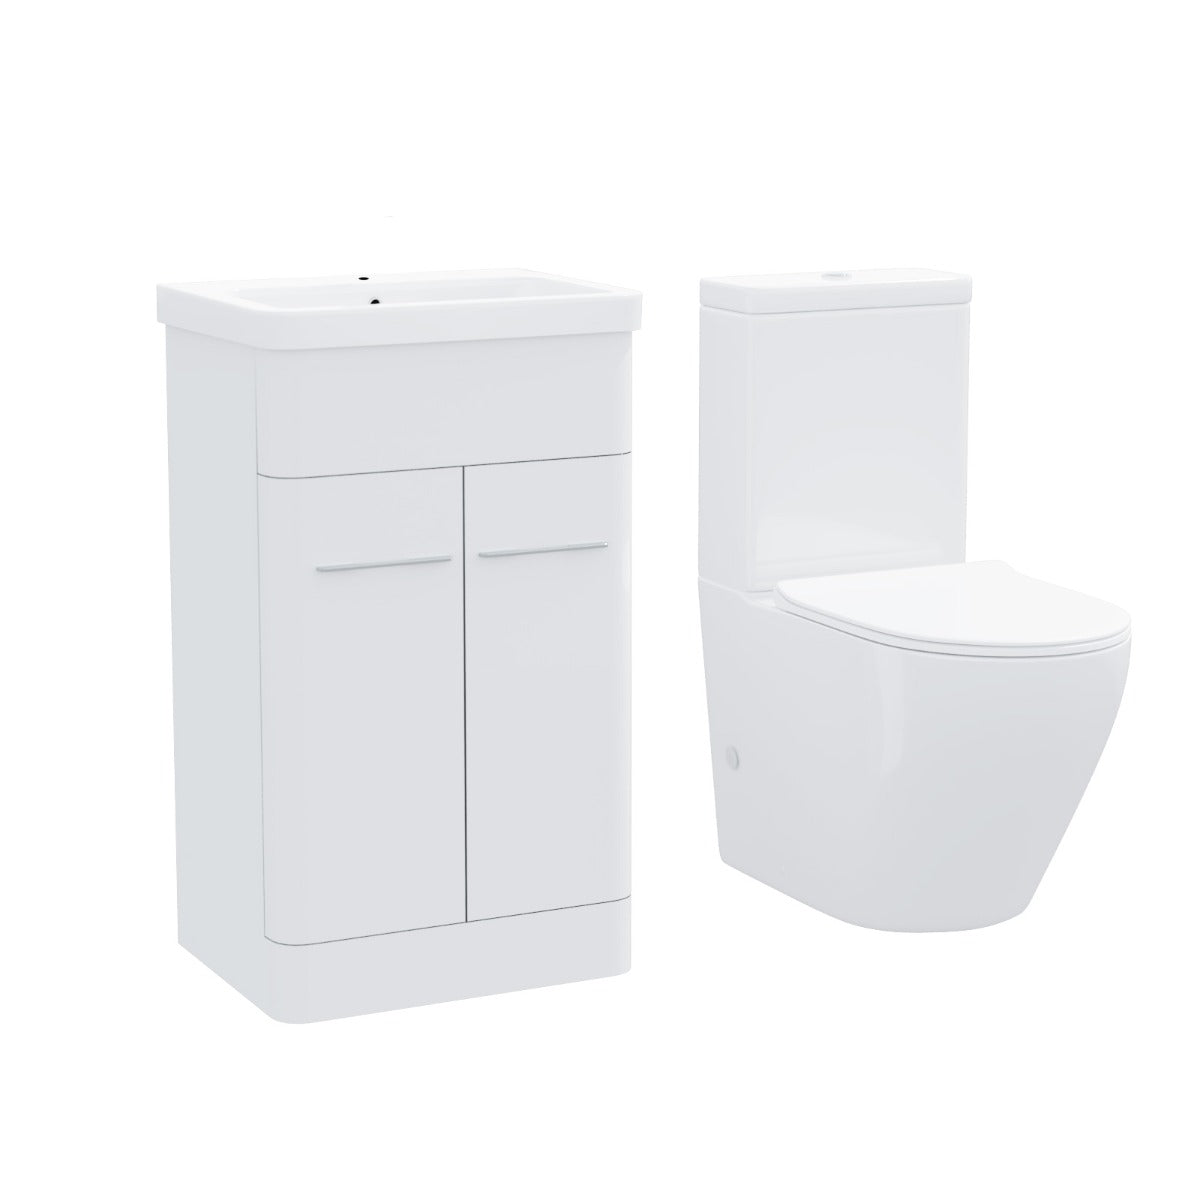 Lex 500 mm Basin Vanity Cabinet And Rimless WC Toilet Suite White